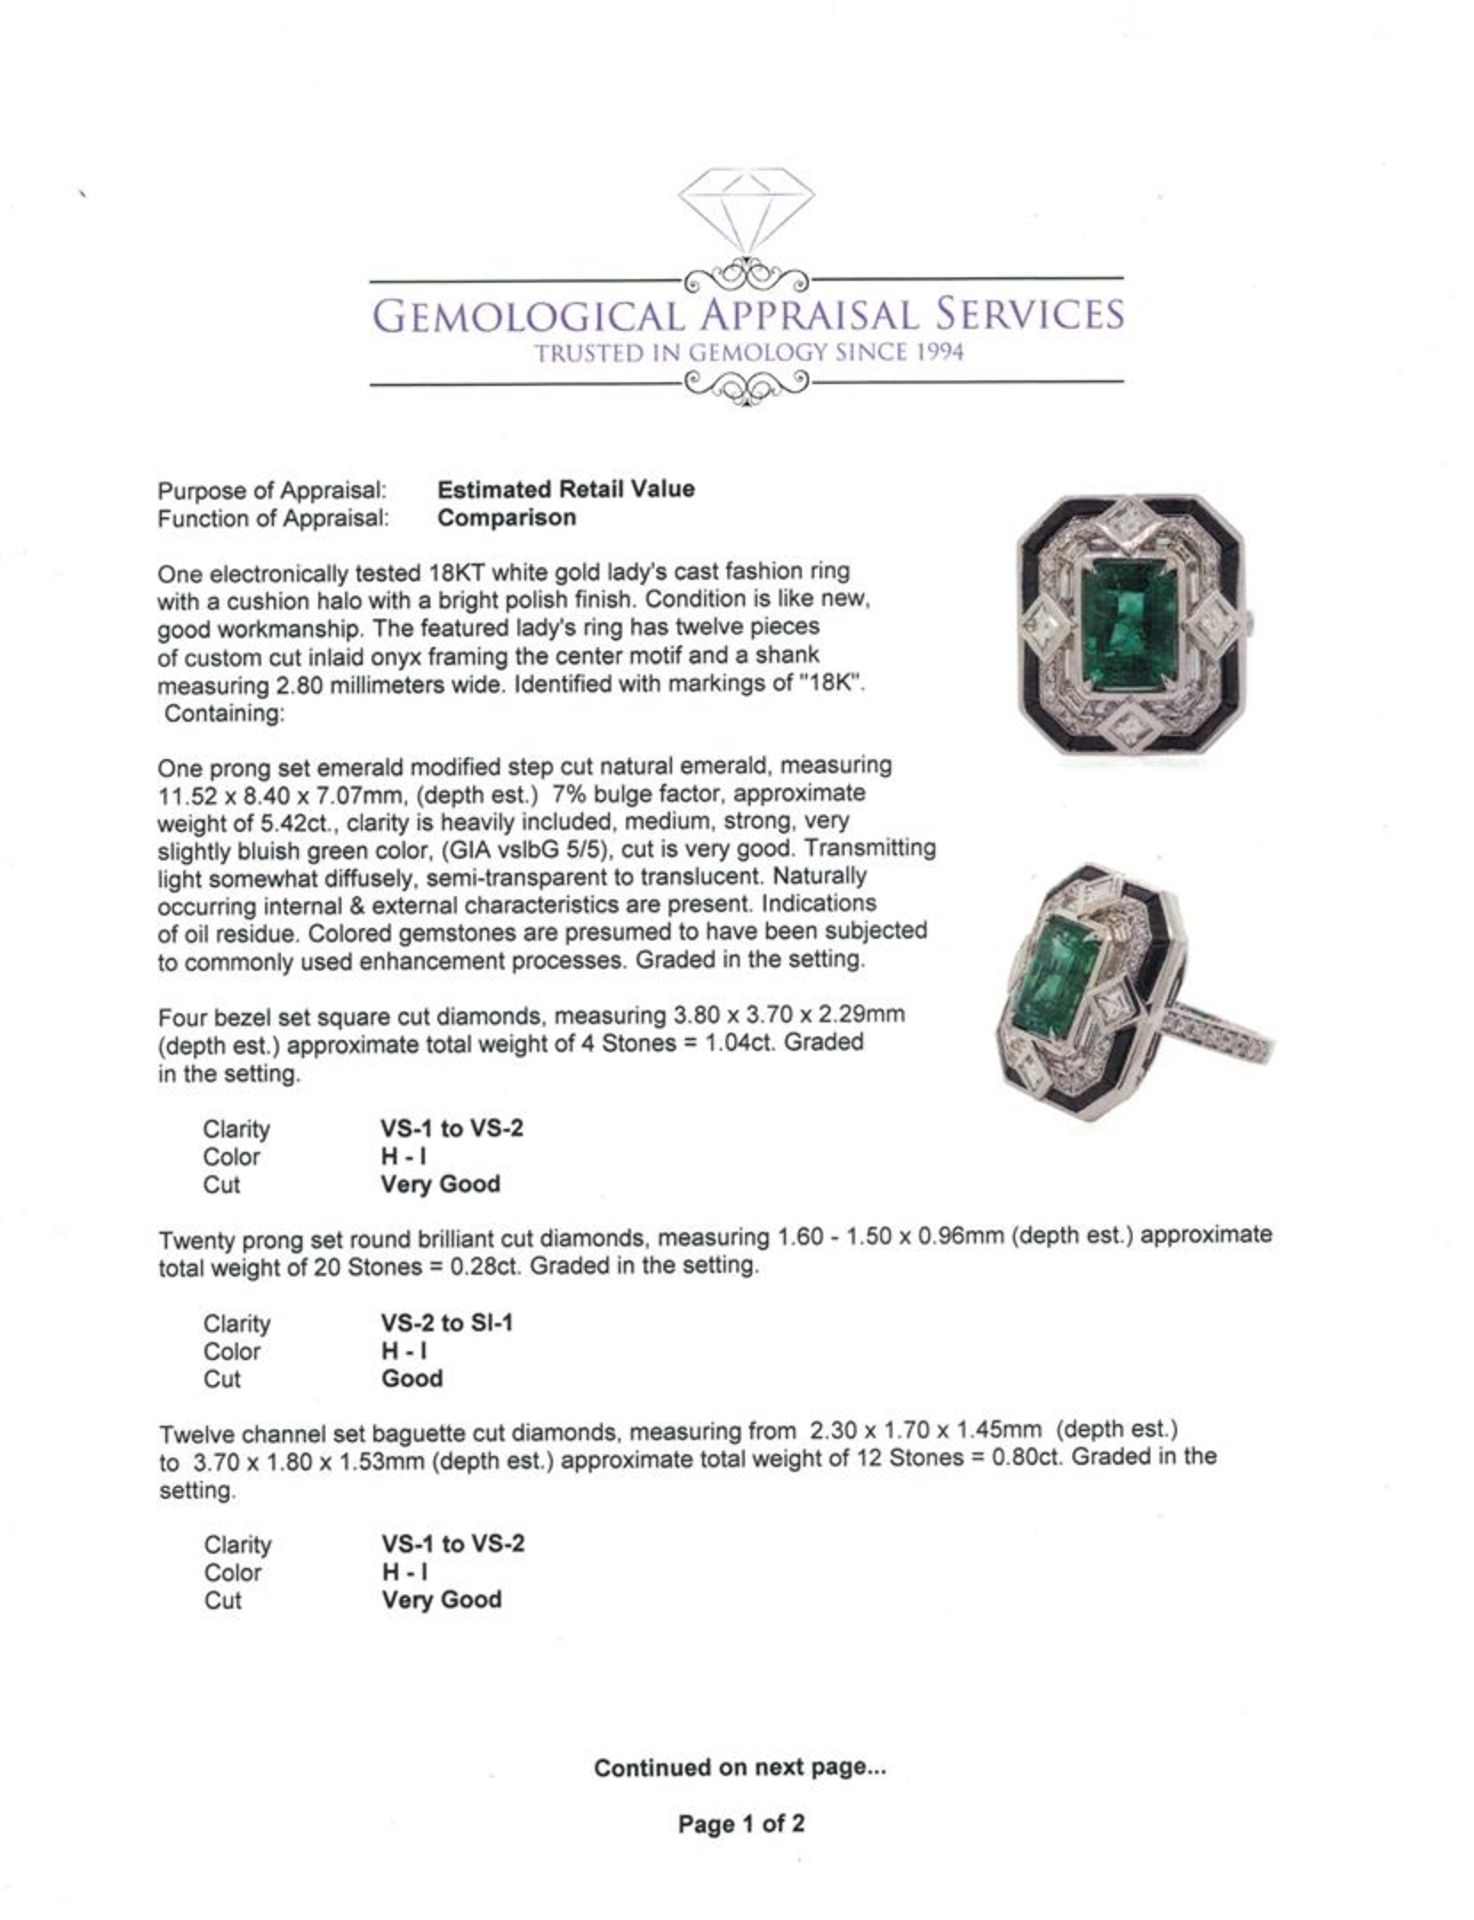 6.46 ctw Emerald and Diamond Ring - 18KT White Gold - Image 5 of 6